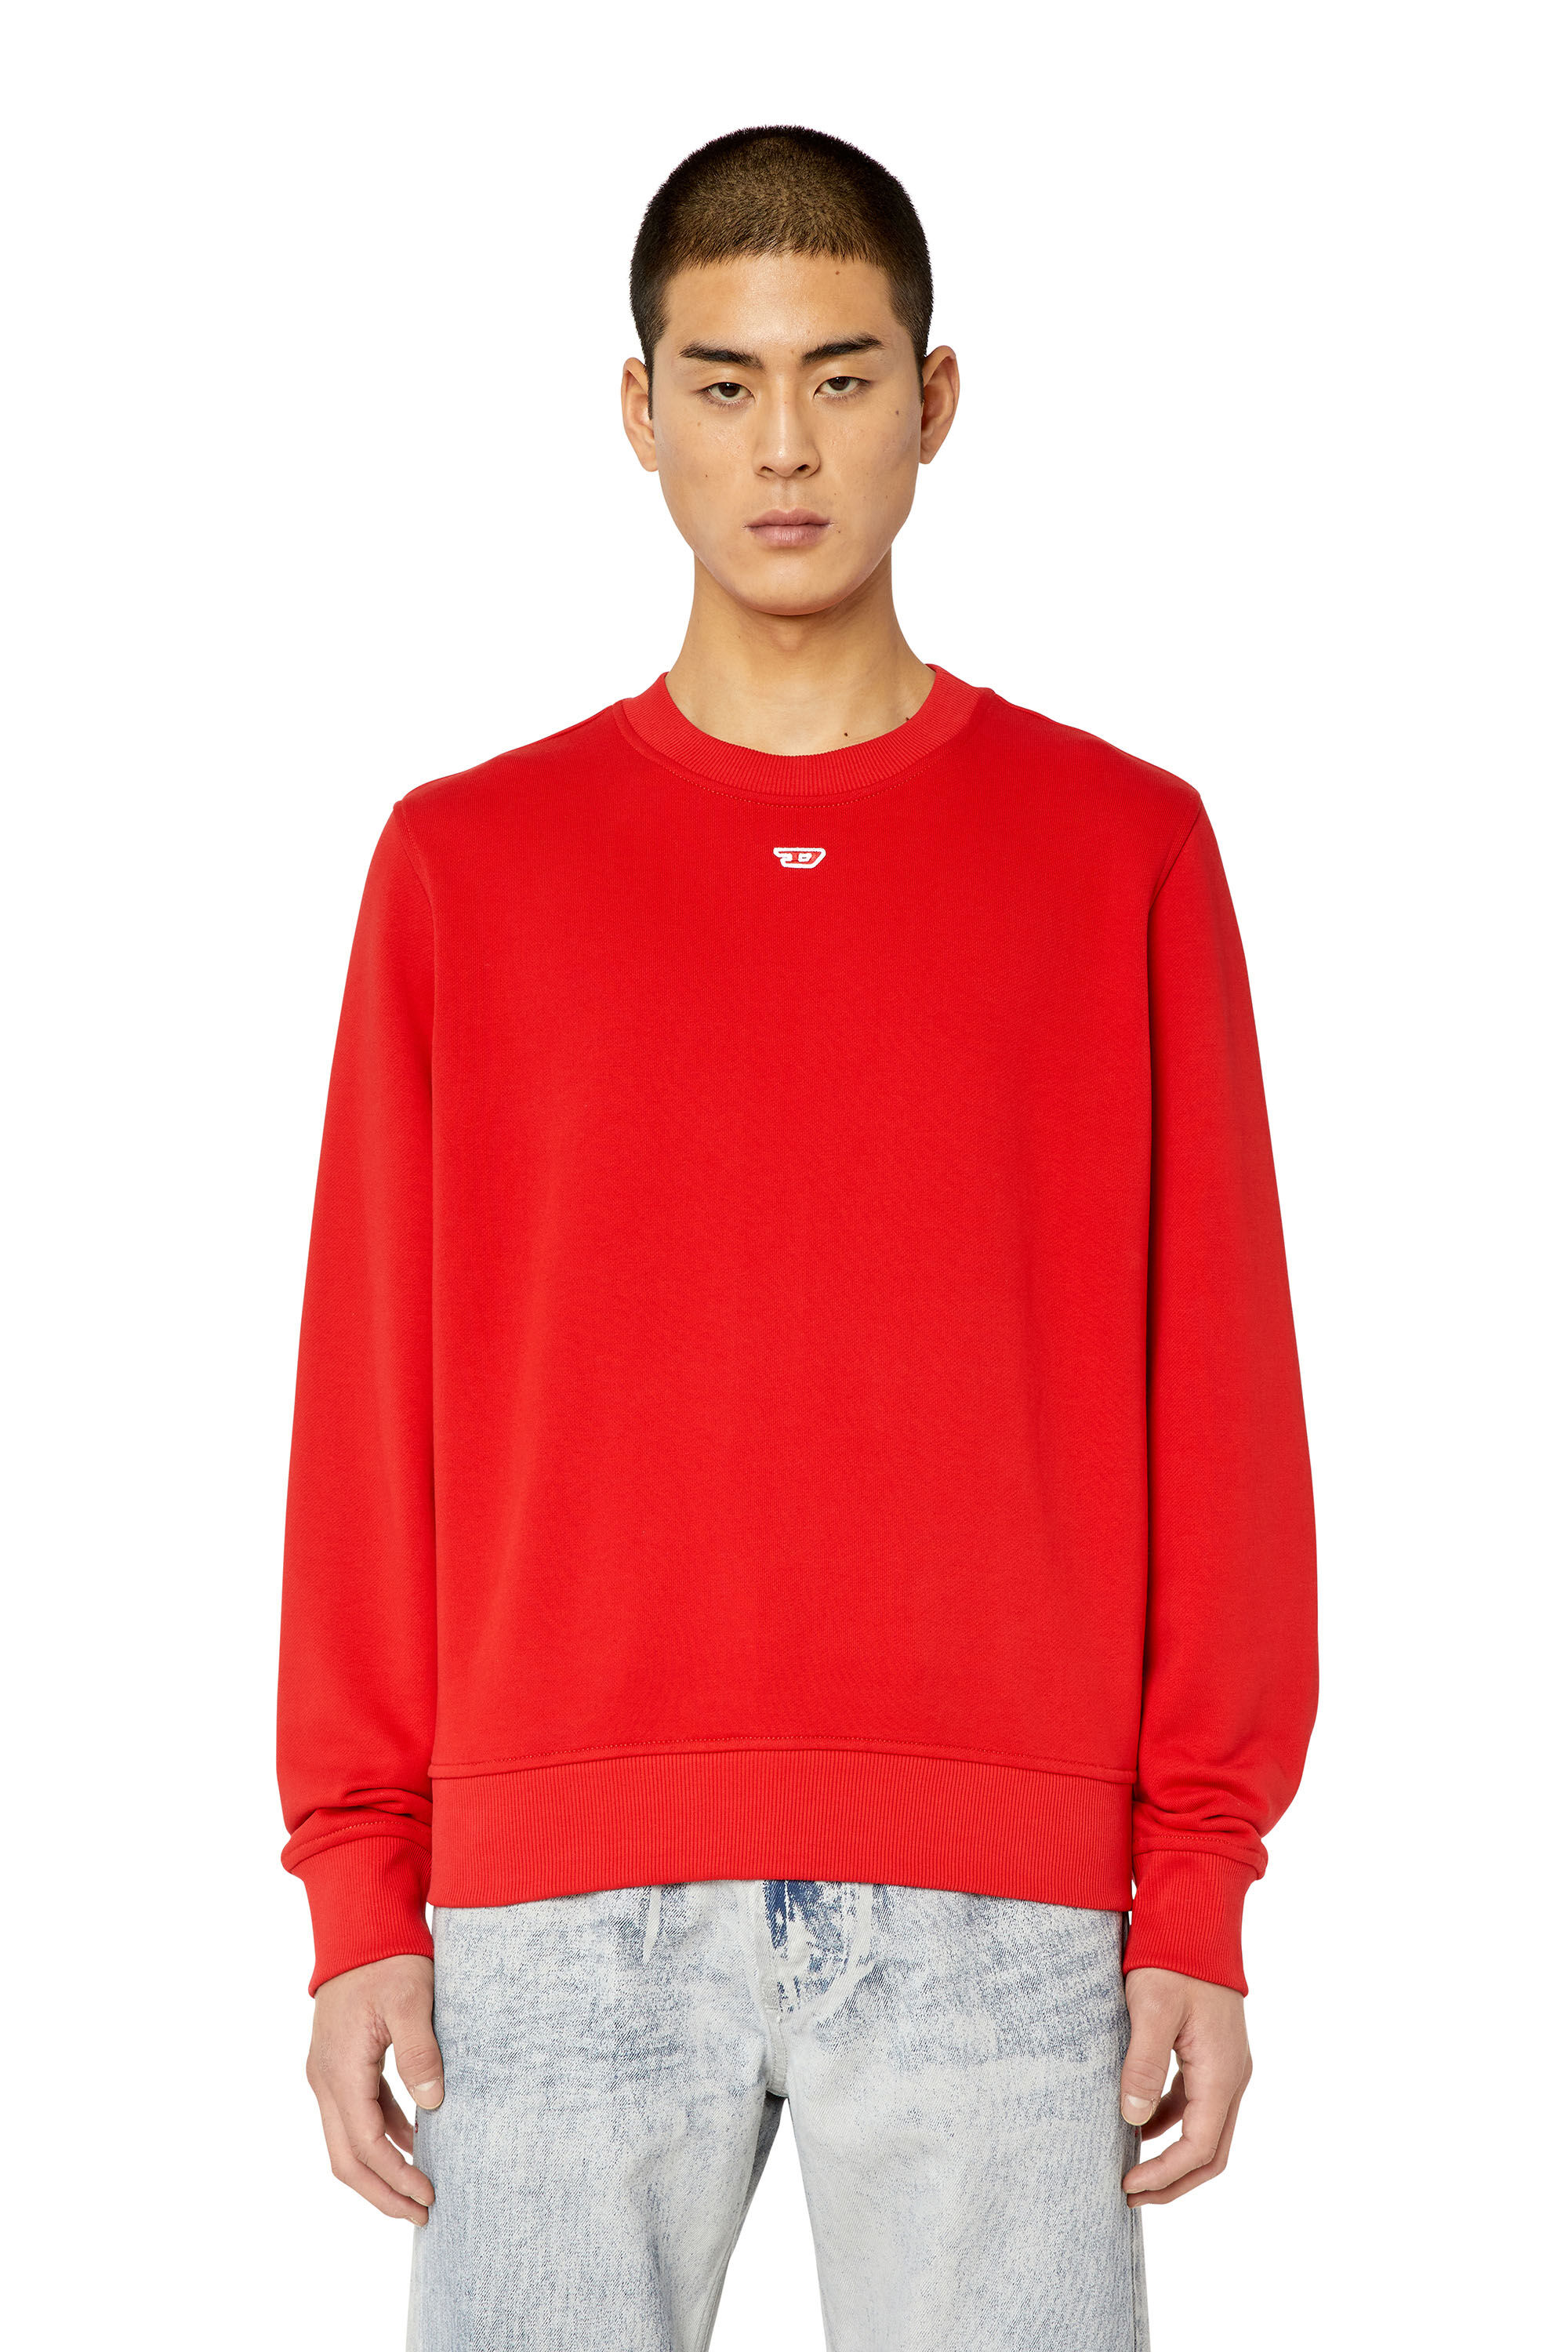 Diesel - S-GINN-D, Unisex Sweatshirt with mini D patch in Red - Image 3